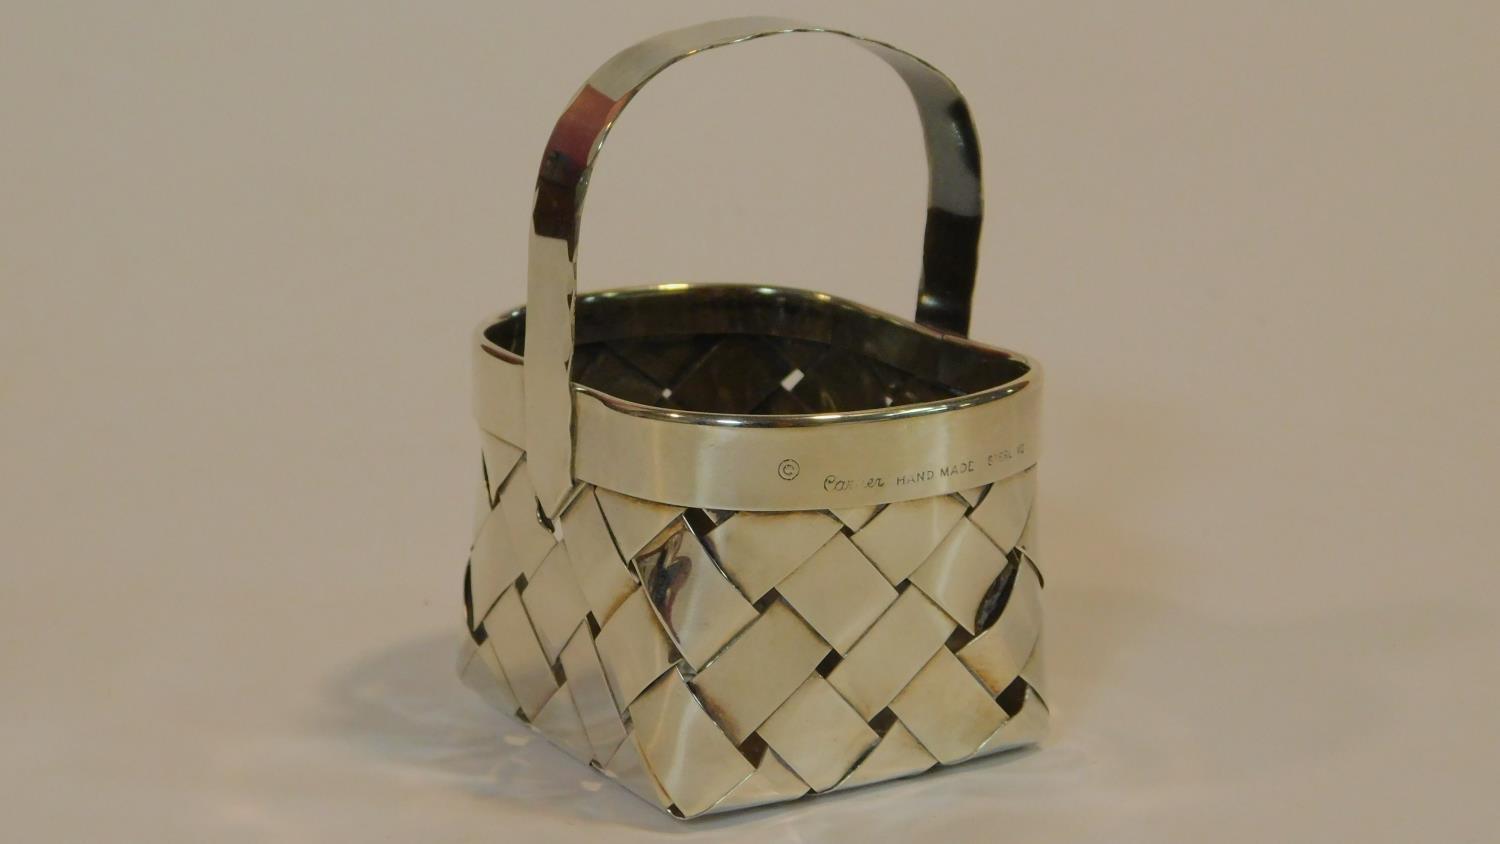 A Cartier silver basket of oval woven form with a scalloped edged handle, end marked to the side